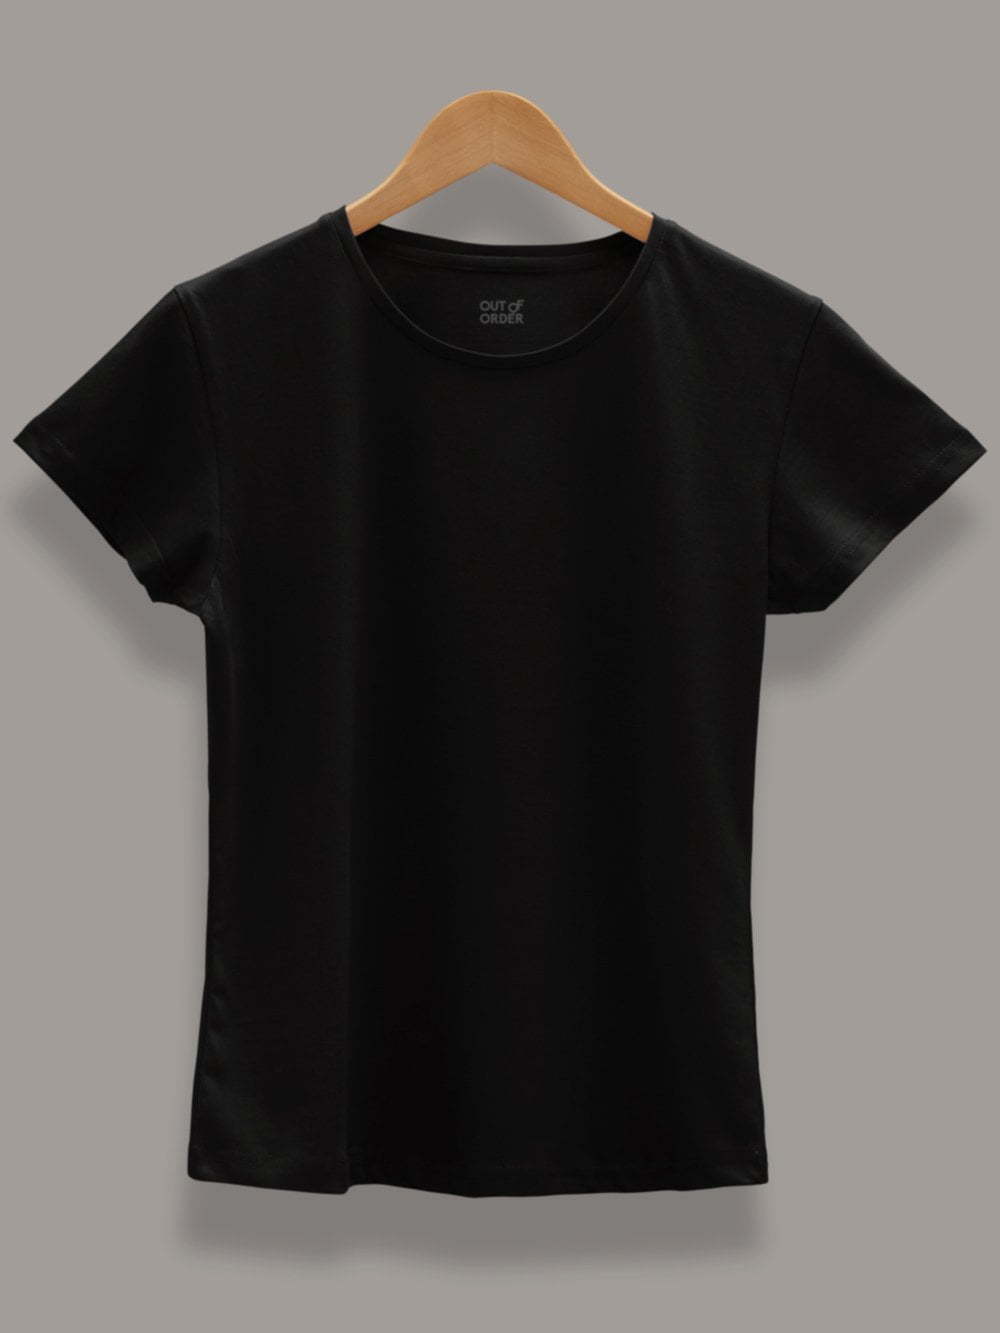 Classy, Cool Women's Black T-shirt by Out Of Order.in